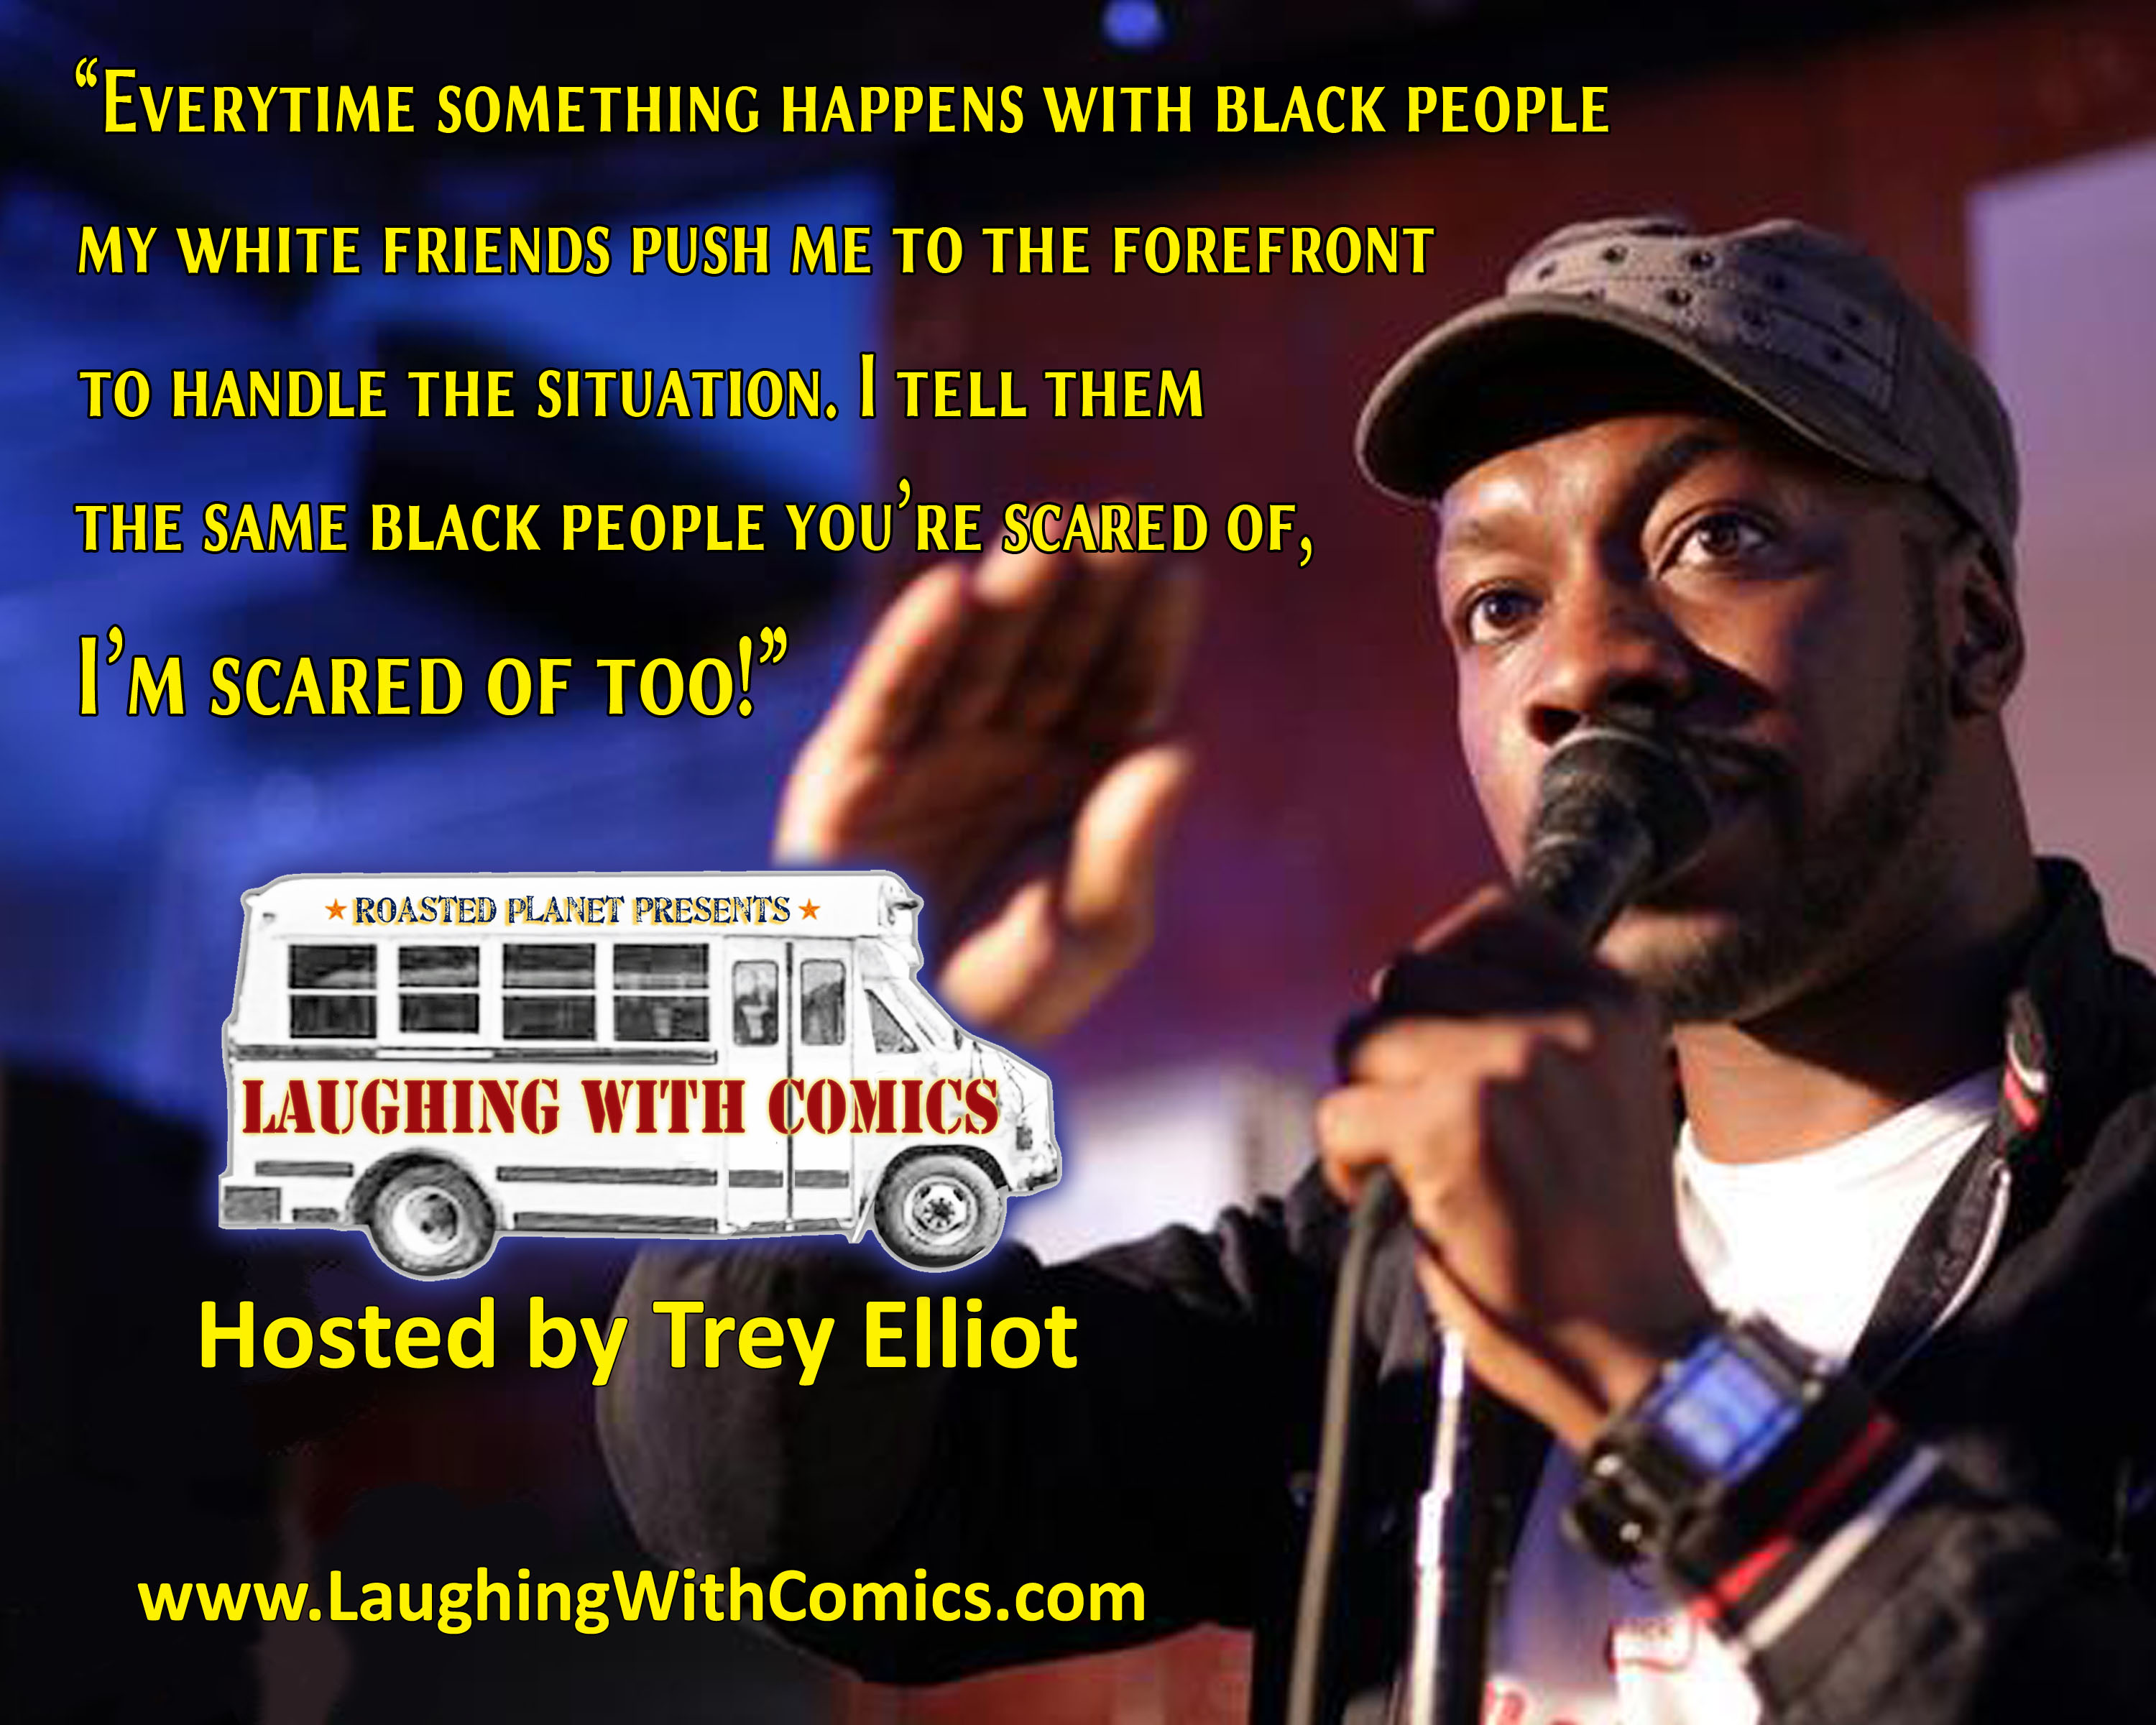 Laughing with Comics 2014 Comedy Tour Hosted by Comedian Trey Elliot